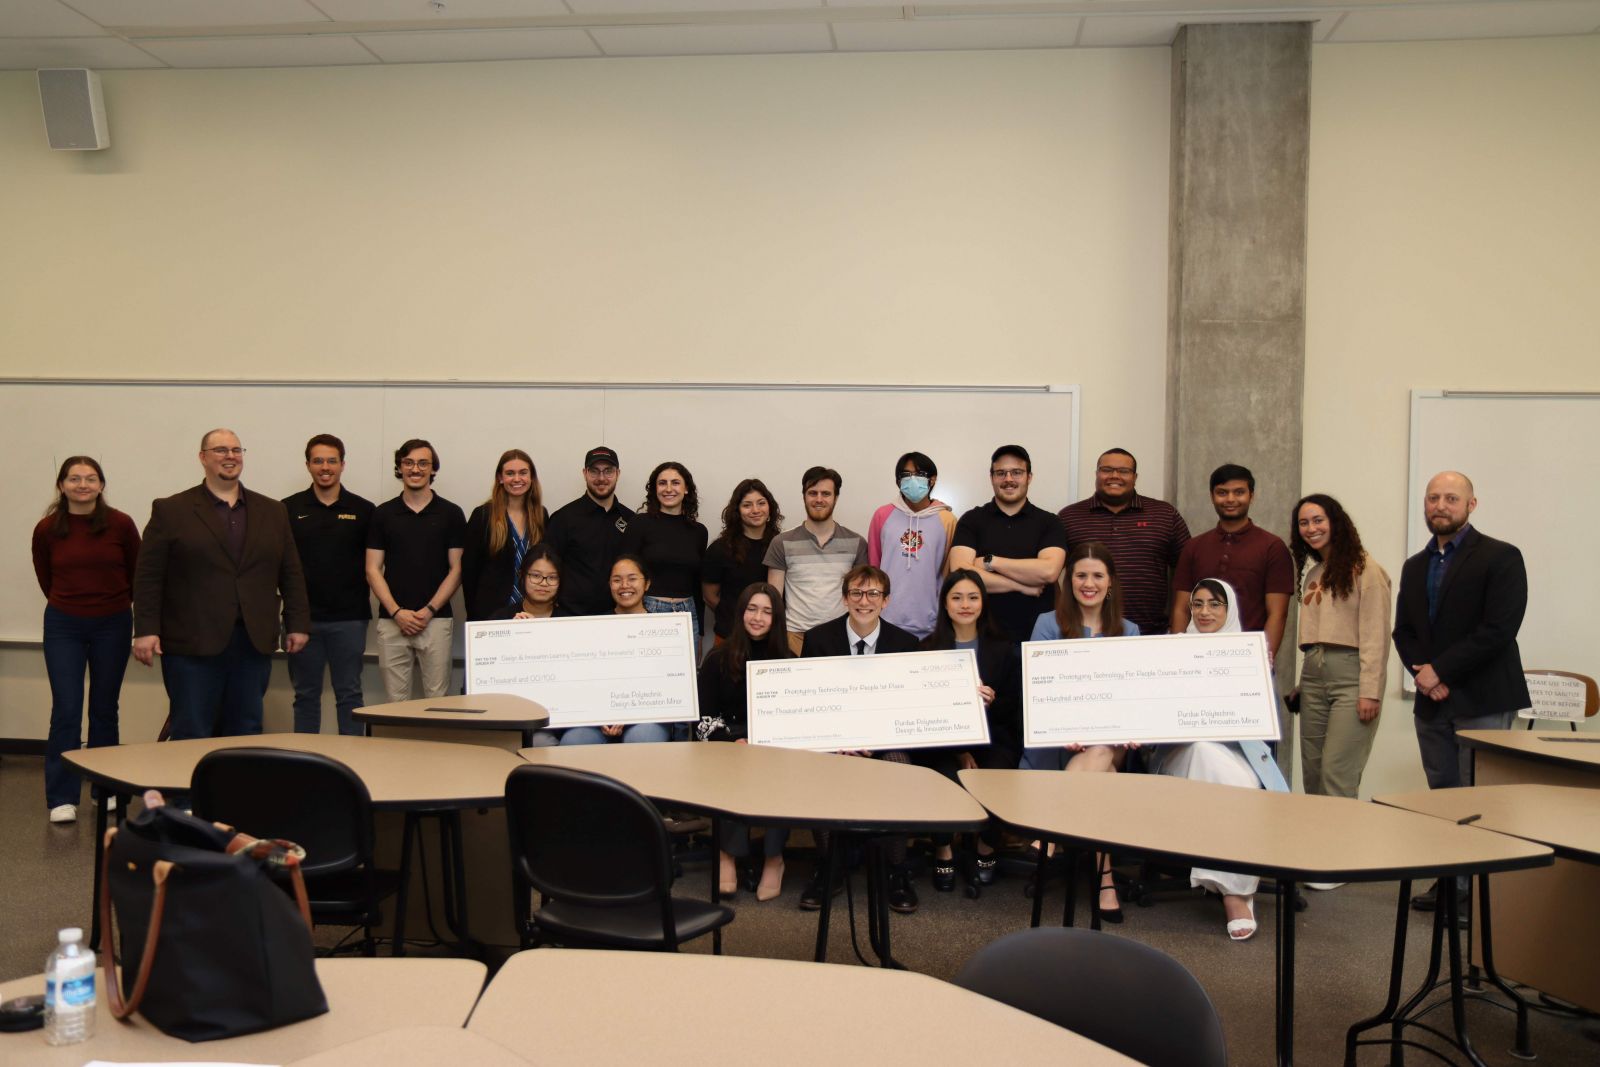 The Design and Innovation minor students and faculty gathered during the awards ceremony at the end of the spring 2023 semester.